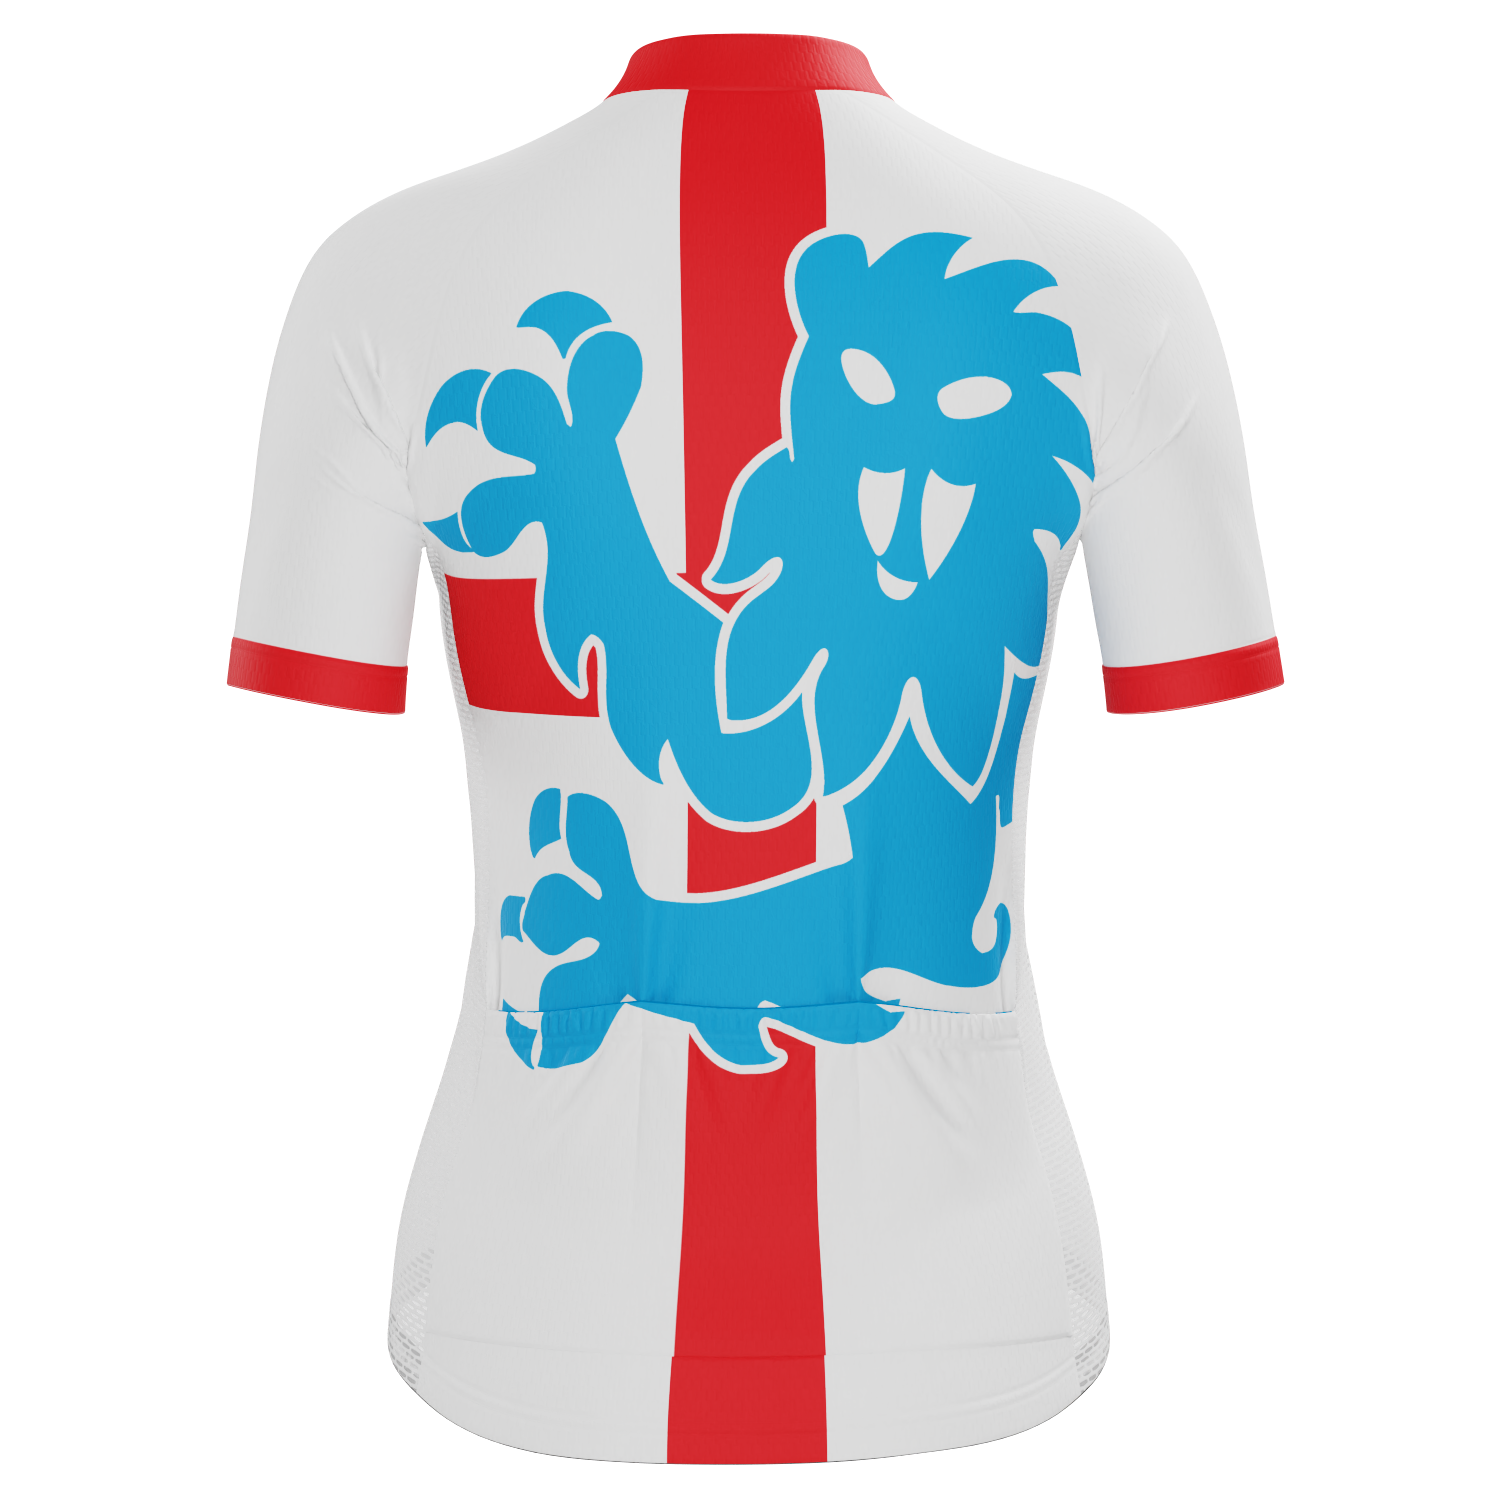 Women's Three Lions England National Flag Short Sleeve Cycling Jersey